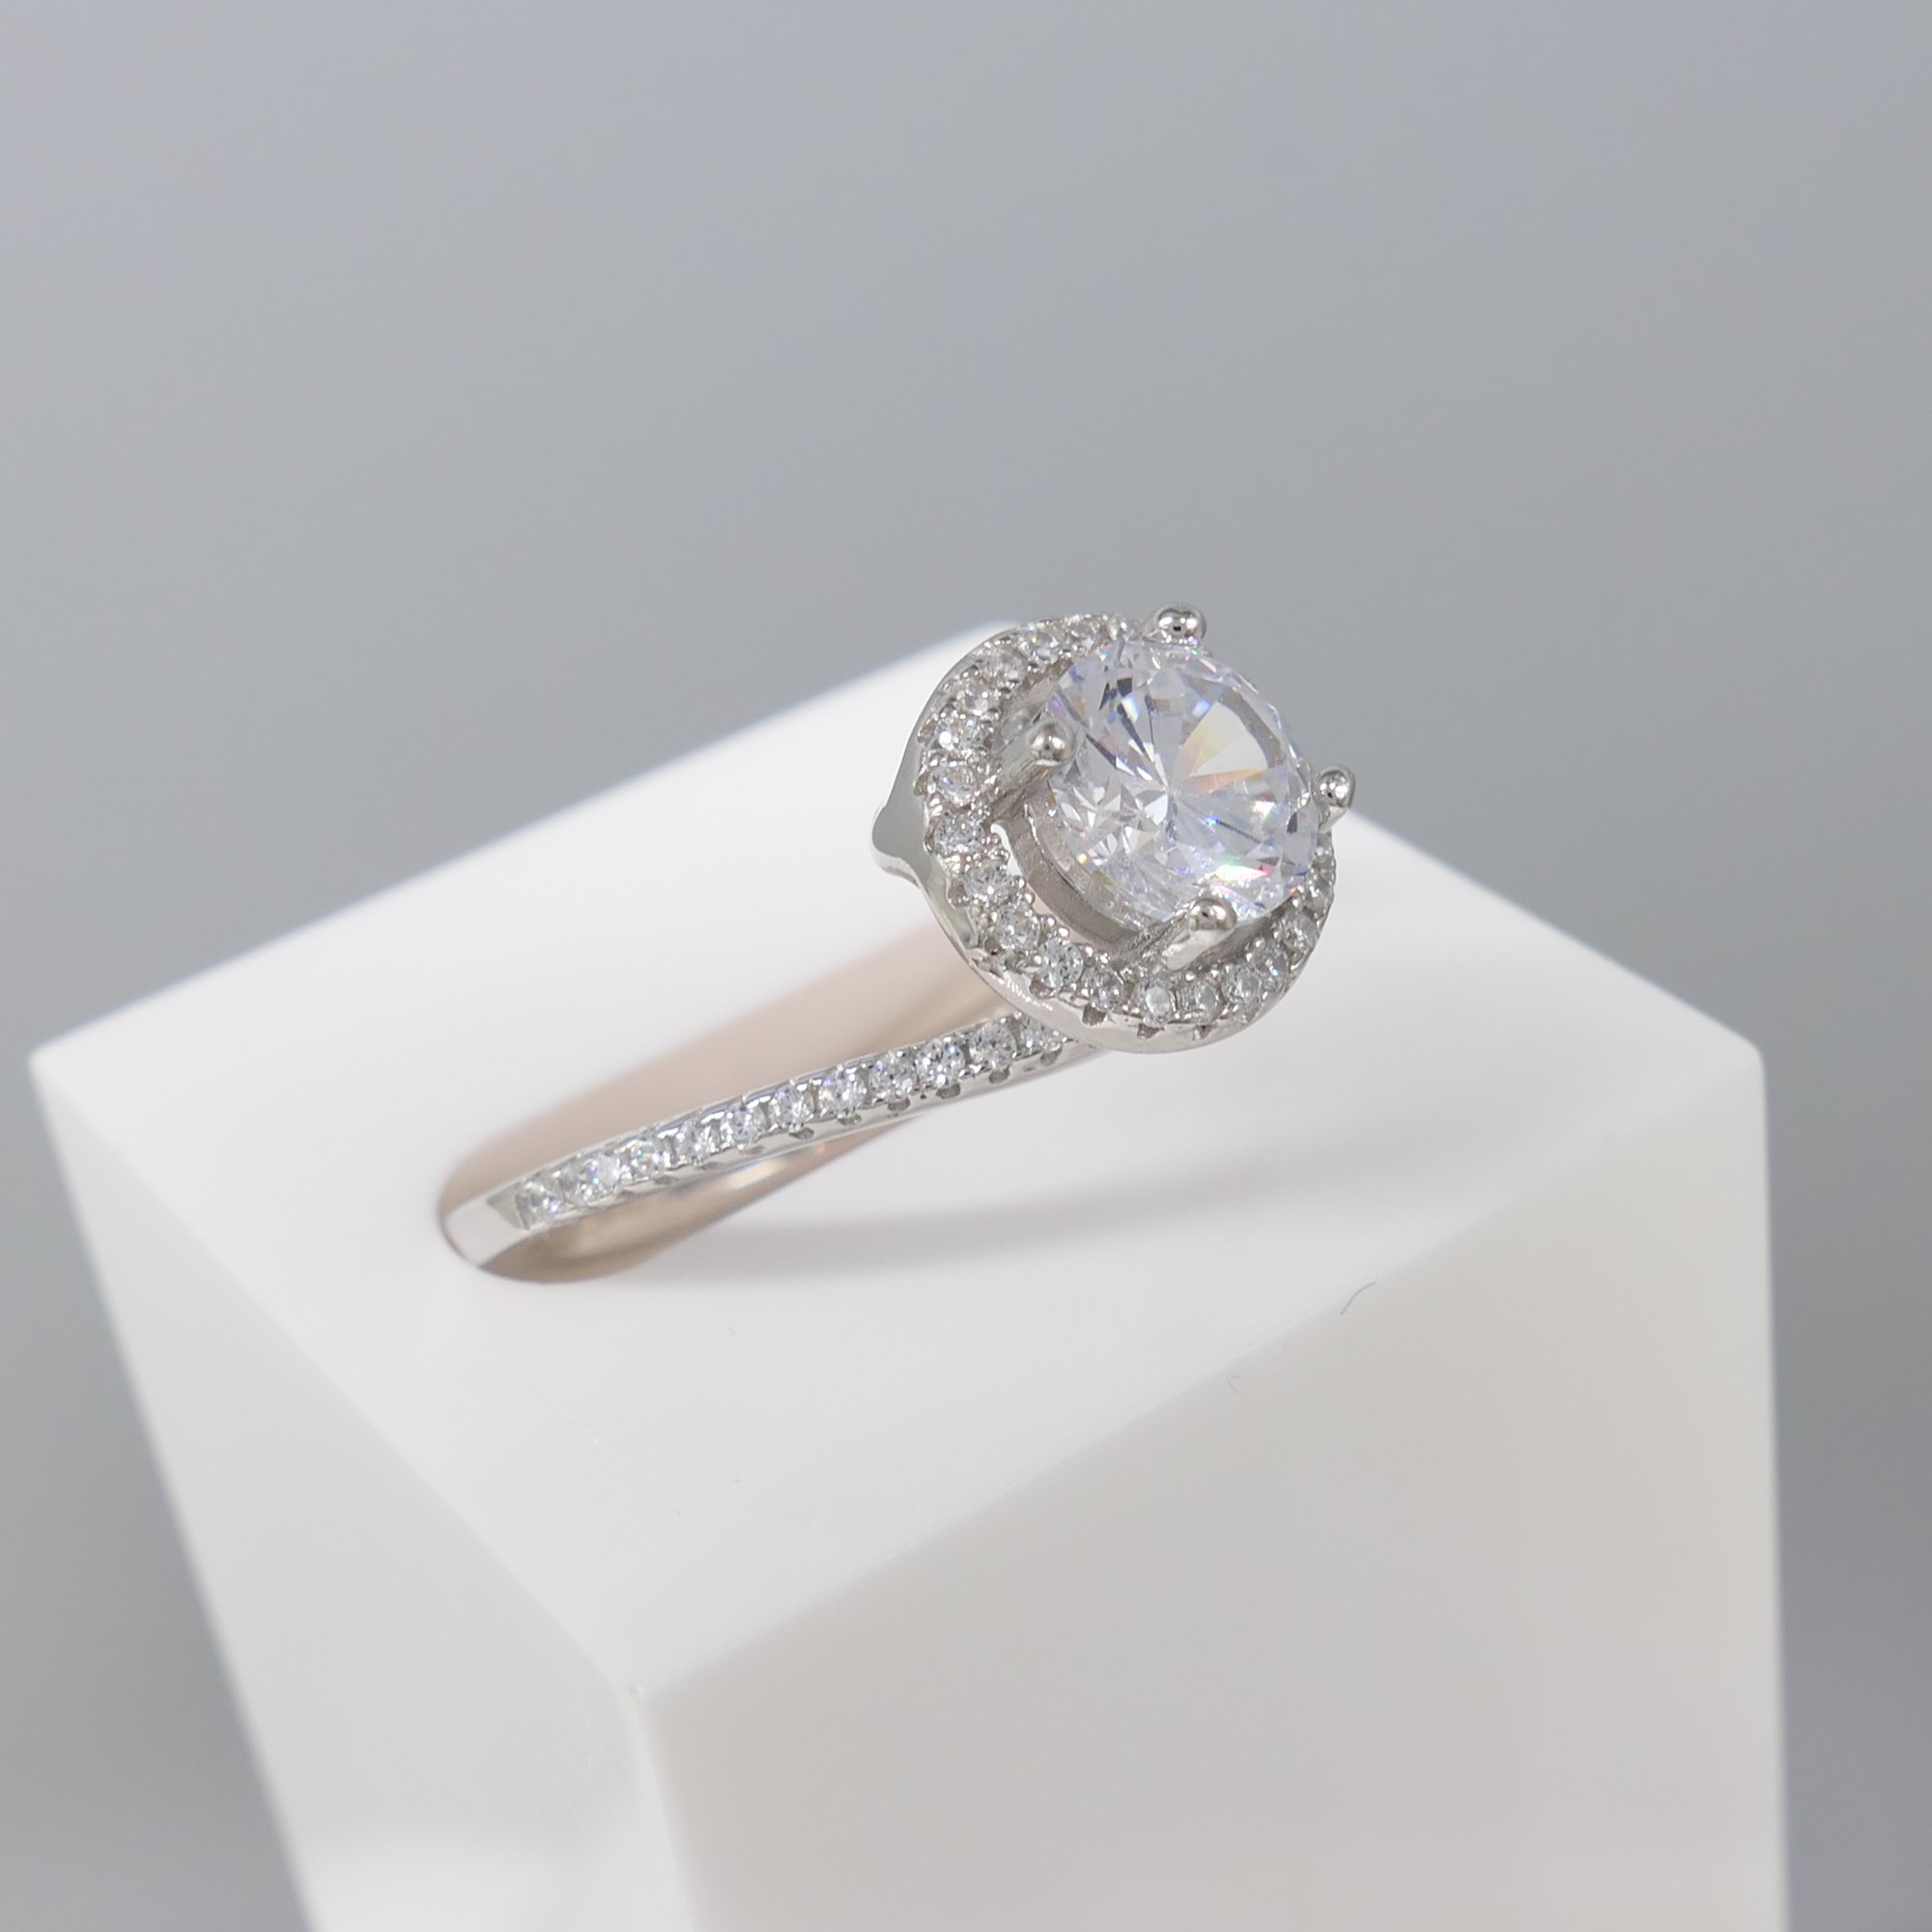 Silver Cubic Zirconia Halo and Twist Dress Ring - Image 3 of 6